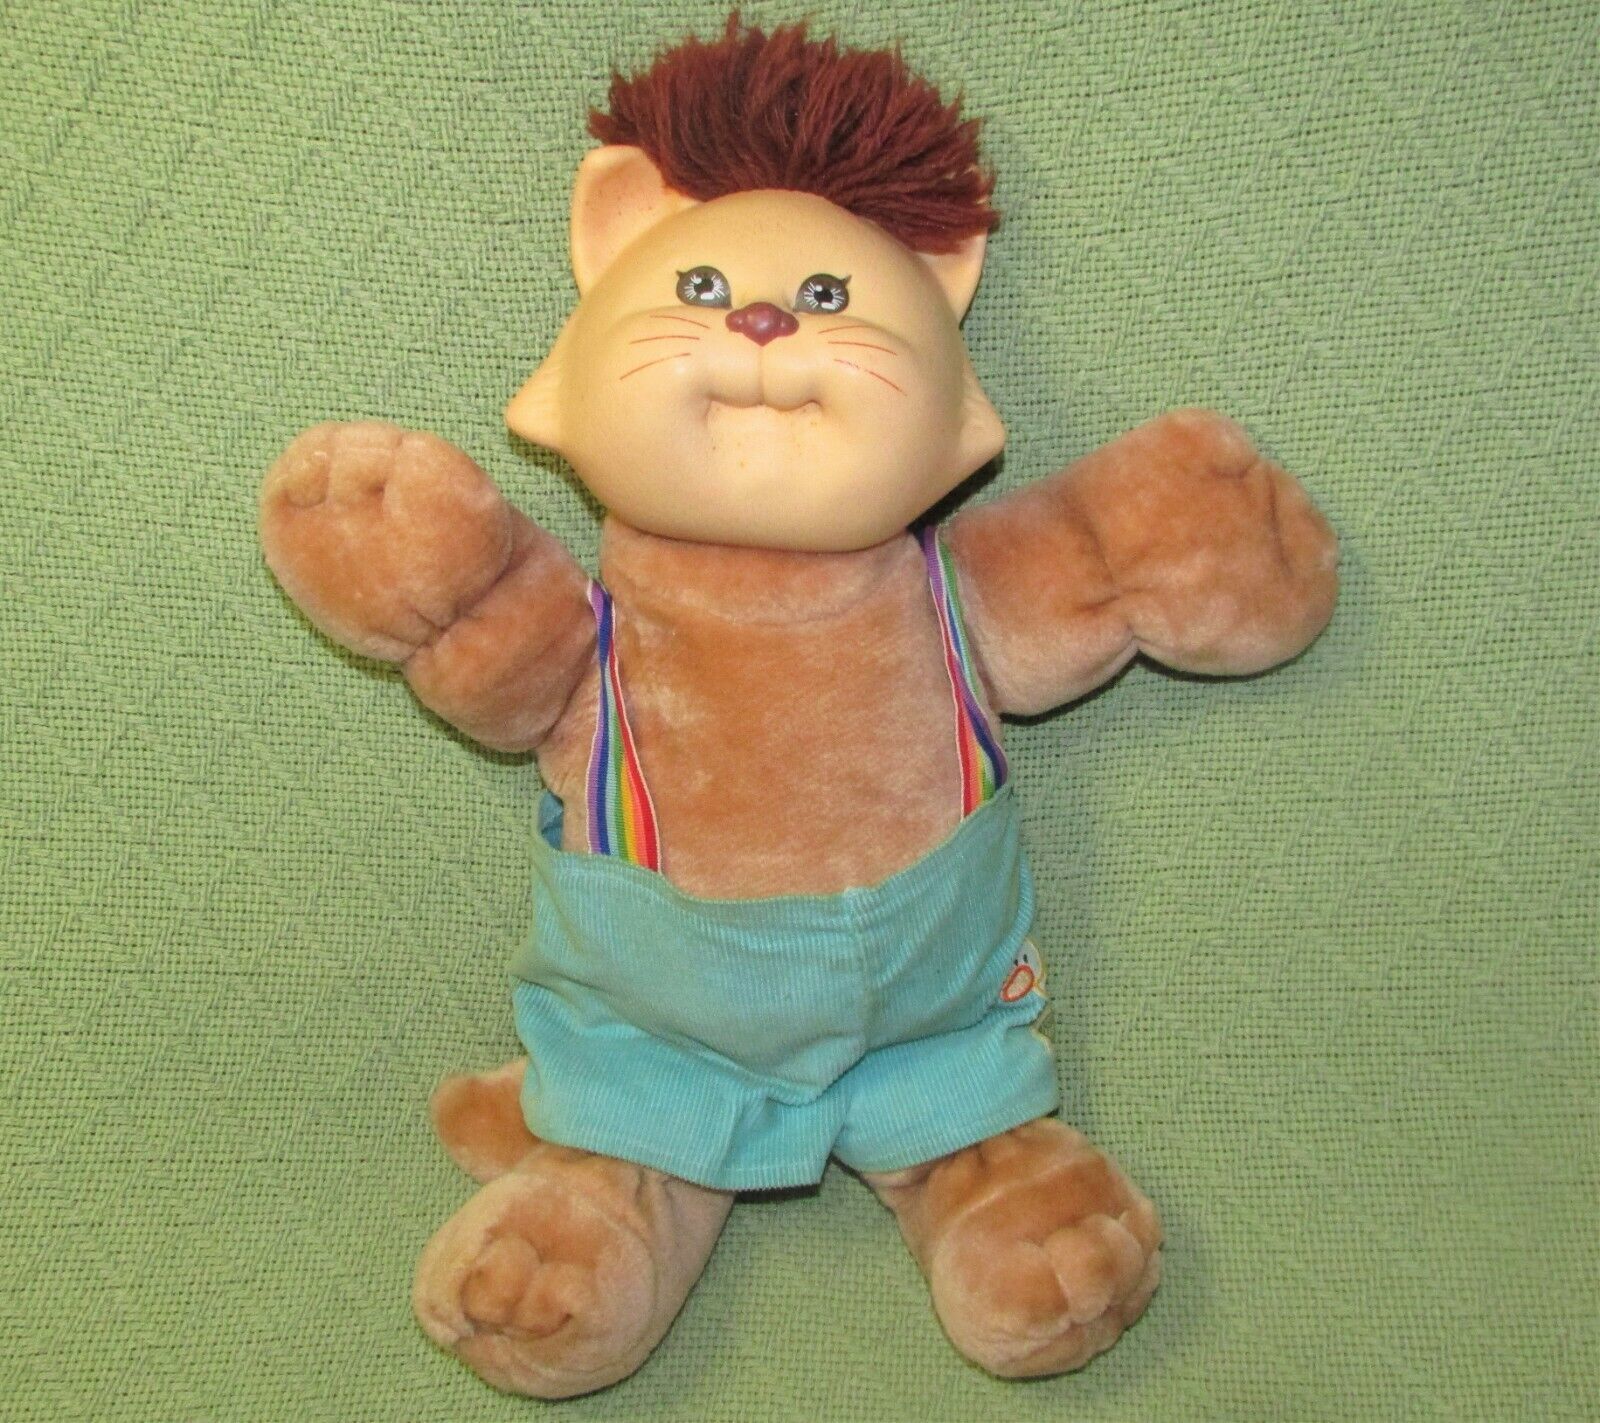 VINTAGE KOOSAS CABBAGE PATCH KIDS 1983 PLUSH STUFFED TAN CAT DOLL with OVERALLS - $35.99